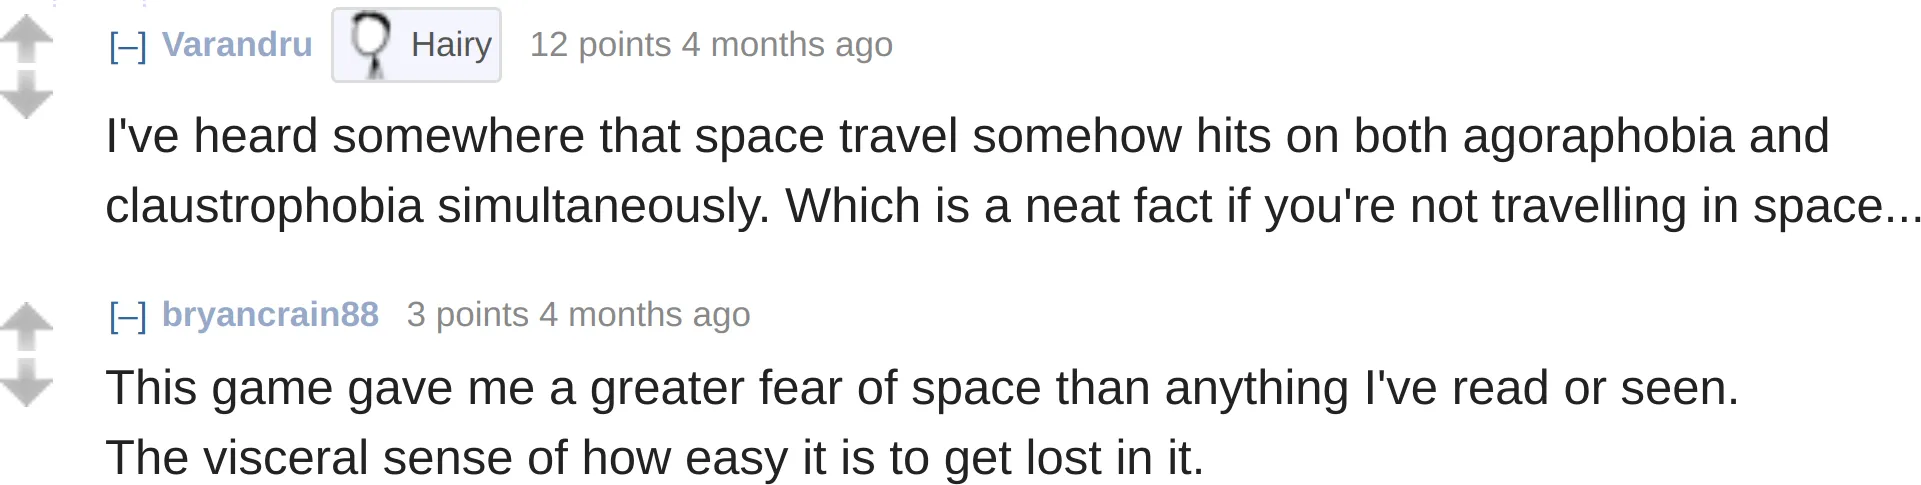 reddit comments on Escape Speed:
Varandru: "I&#x27;ve heard somewhere that space travel somehow hits on both agoraphobia and claustrophobia simultaneously. Which is a neat fact if you&#x27;re not travelling in space..."
bryancrain88: "This game gave me a greater fear of space than anything I&#x27;ve read or seen. The visceral sense of how easy it is to get lost in it."